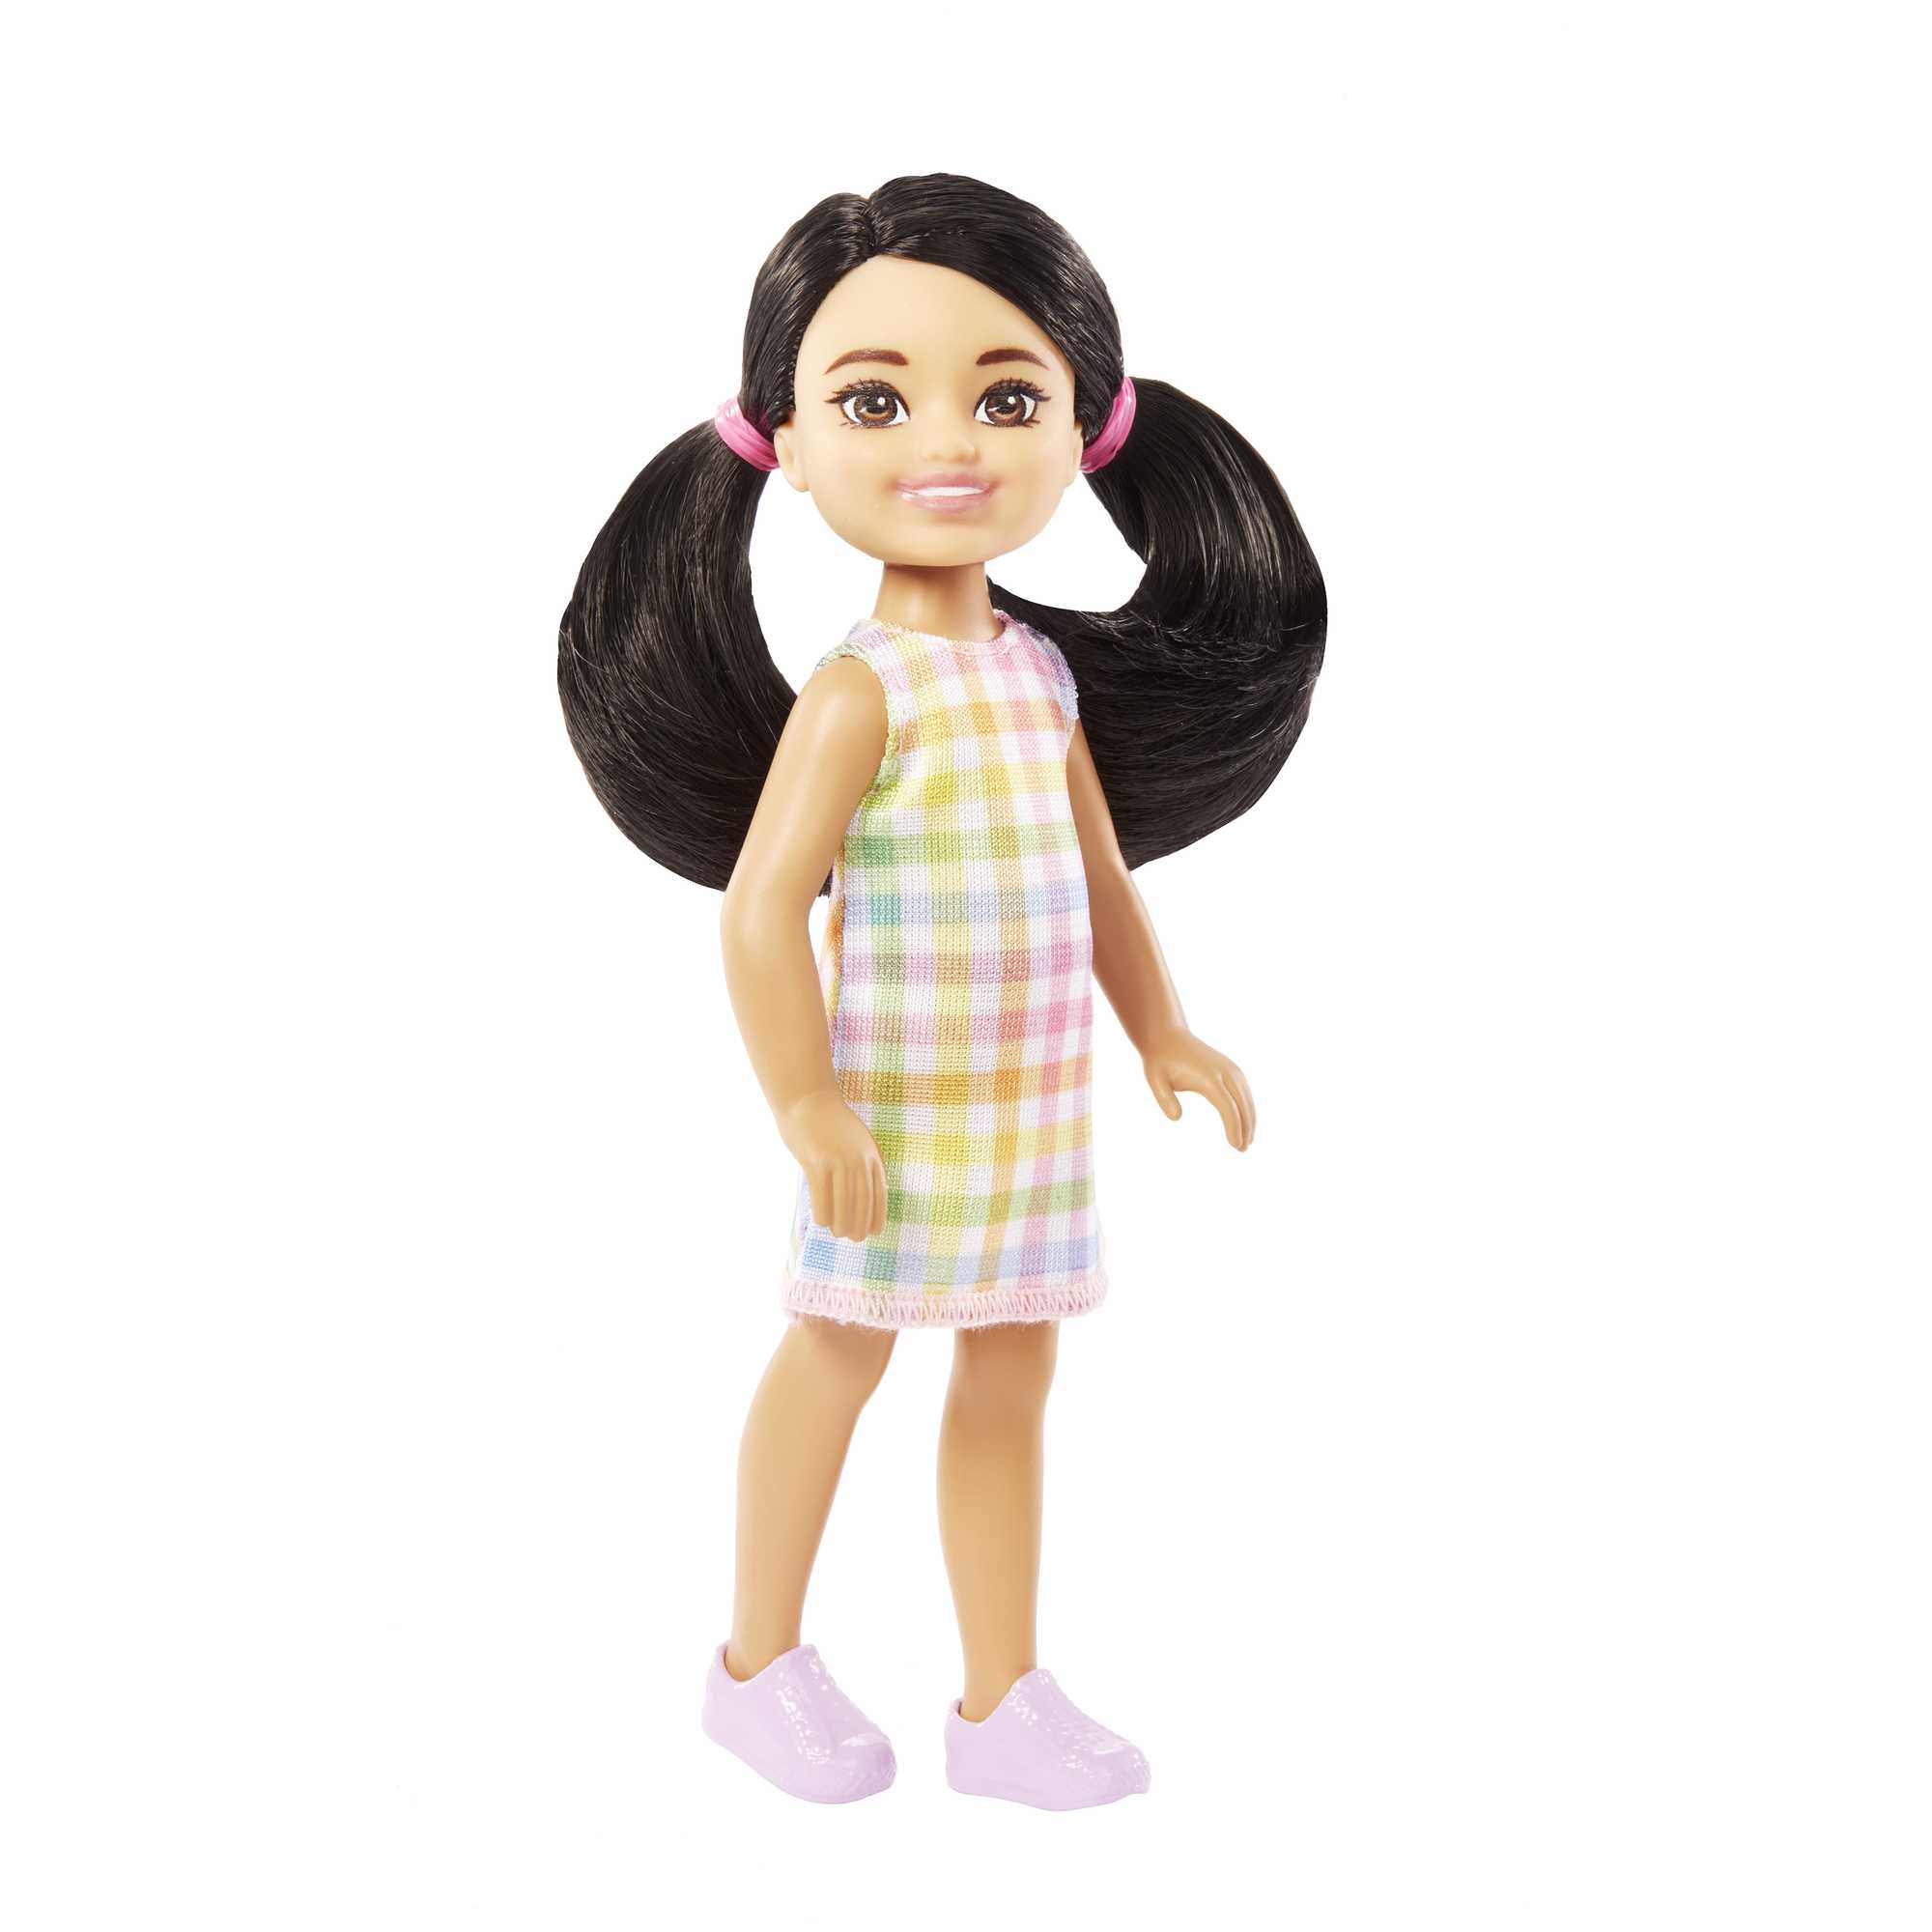 2: Barbie - Chelsea and Friends Doll - Plaid Dress With Black Hair (HKD91)